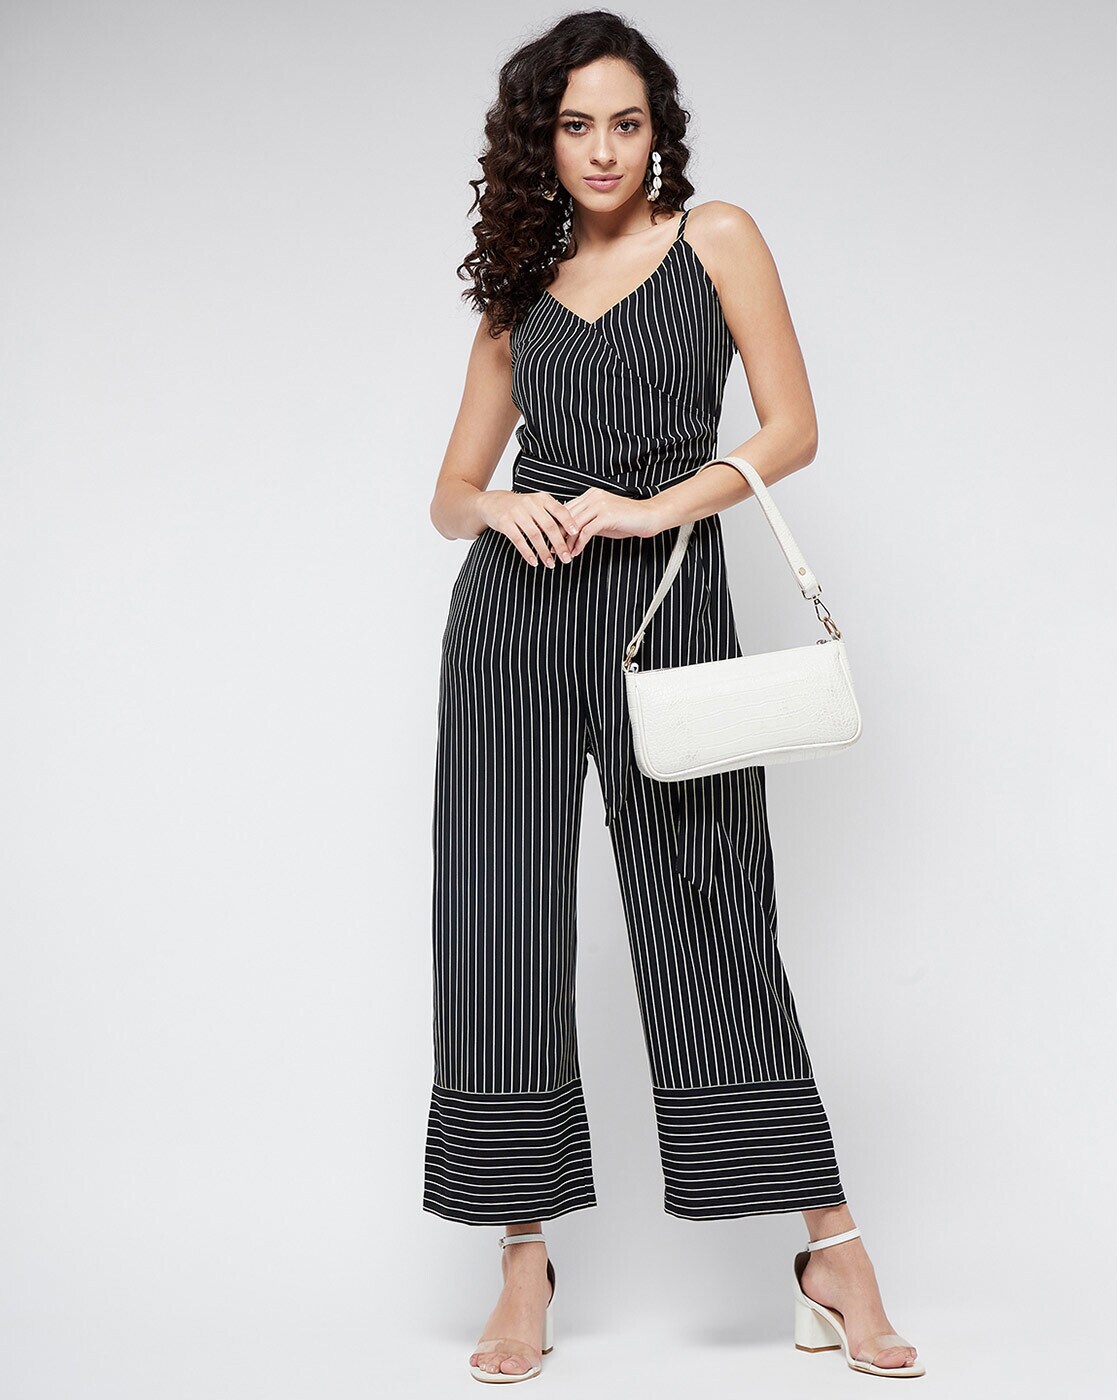 Forever 21 Striped Halter Jumpsuit  Jumpsuits for women Fashion Stripe  outfits